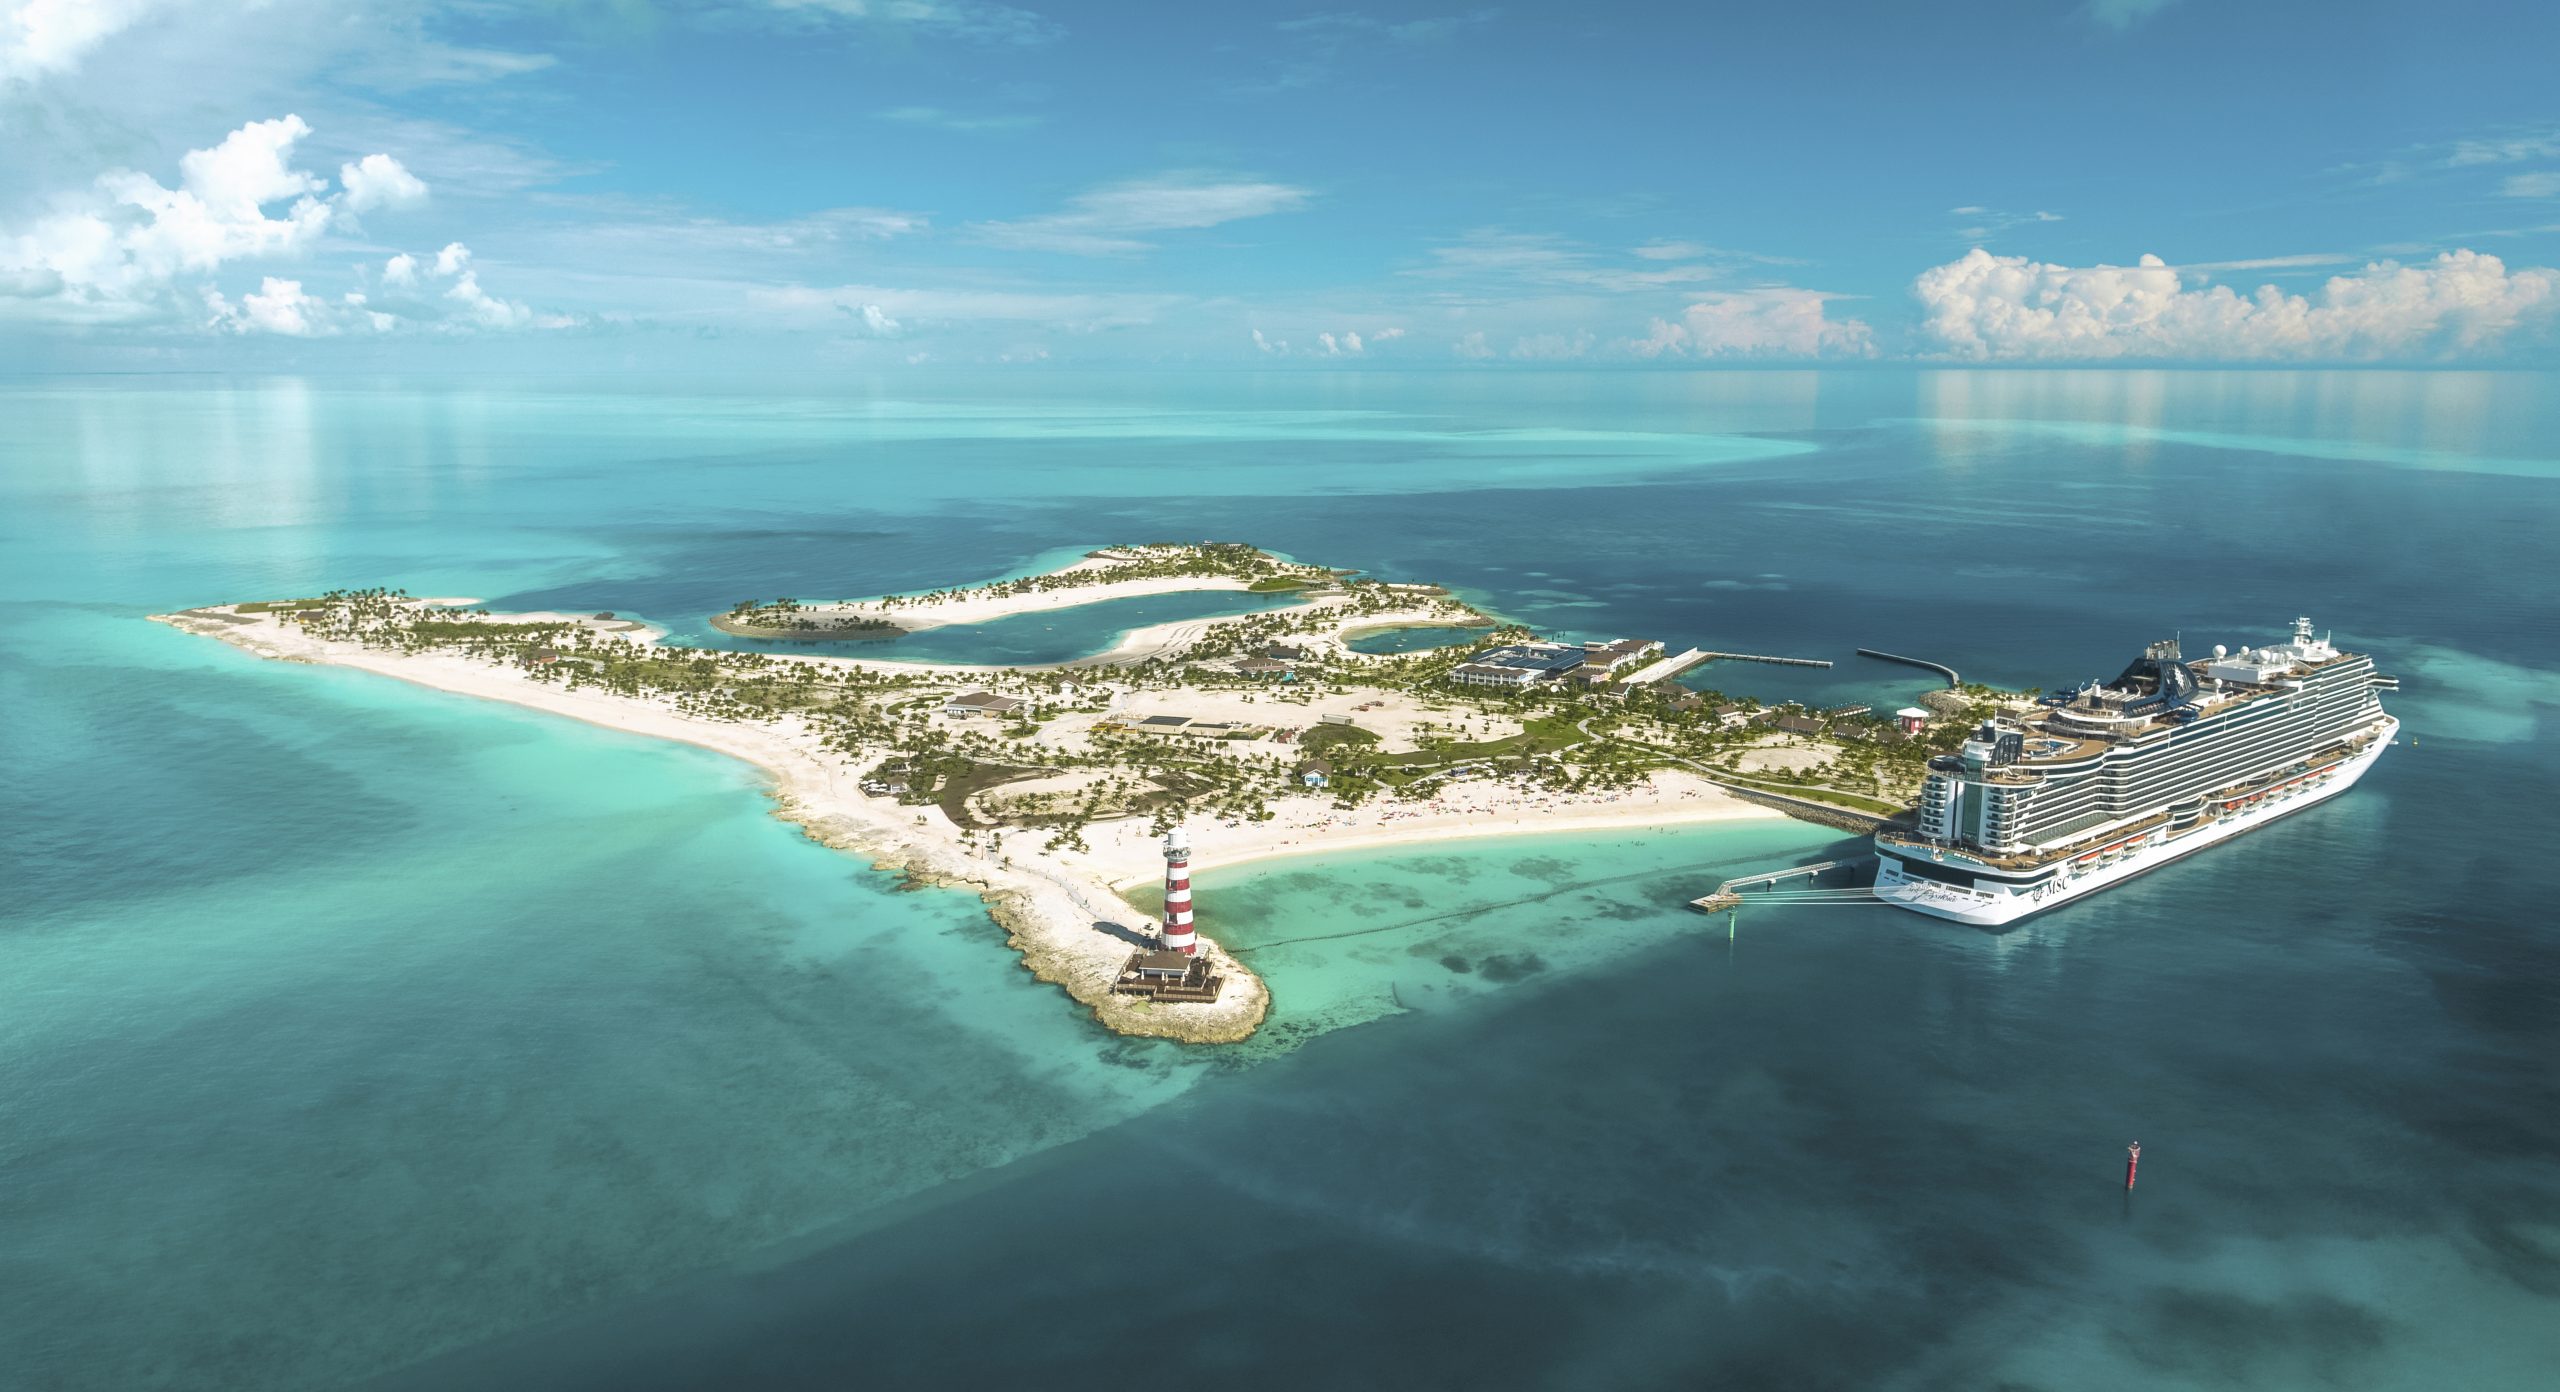 10 Essential Things to Know Before Visiting MSC's Ocean Cay